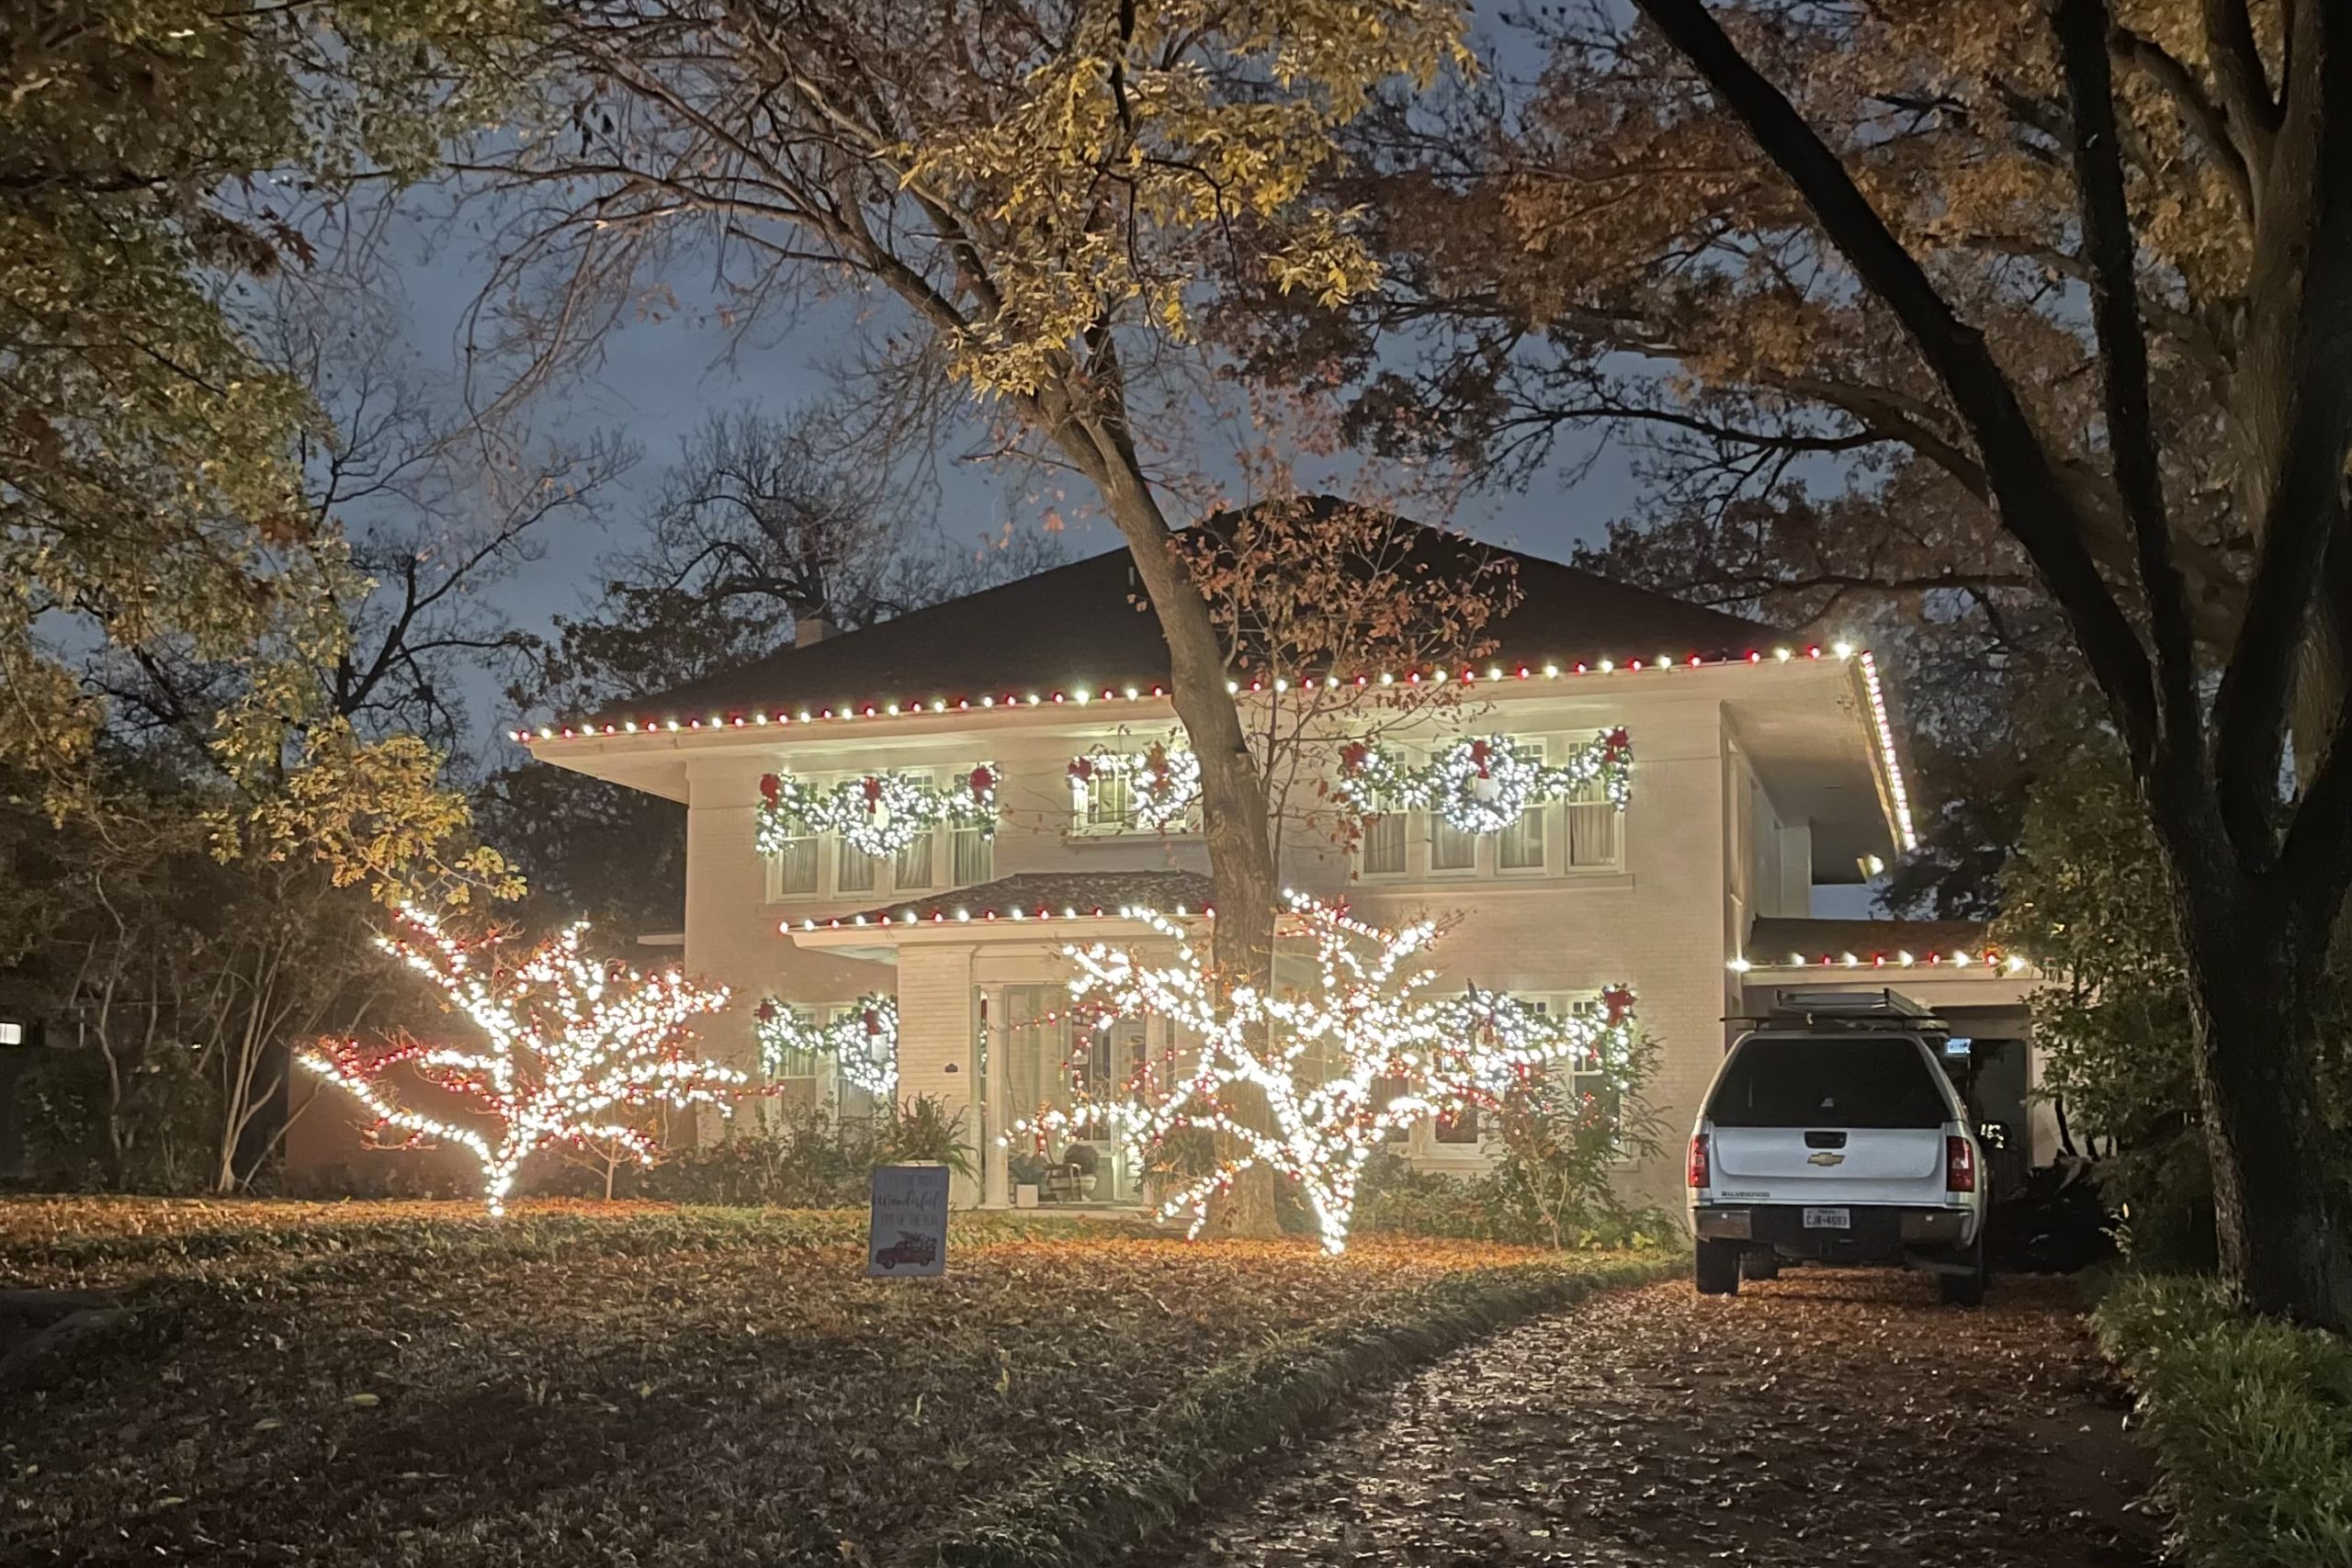 Lights on home and trees in Swiss Avenue